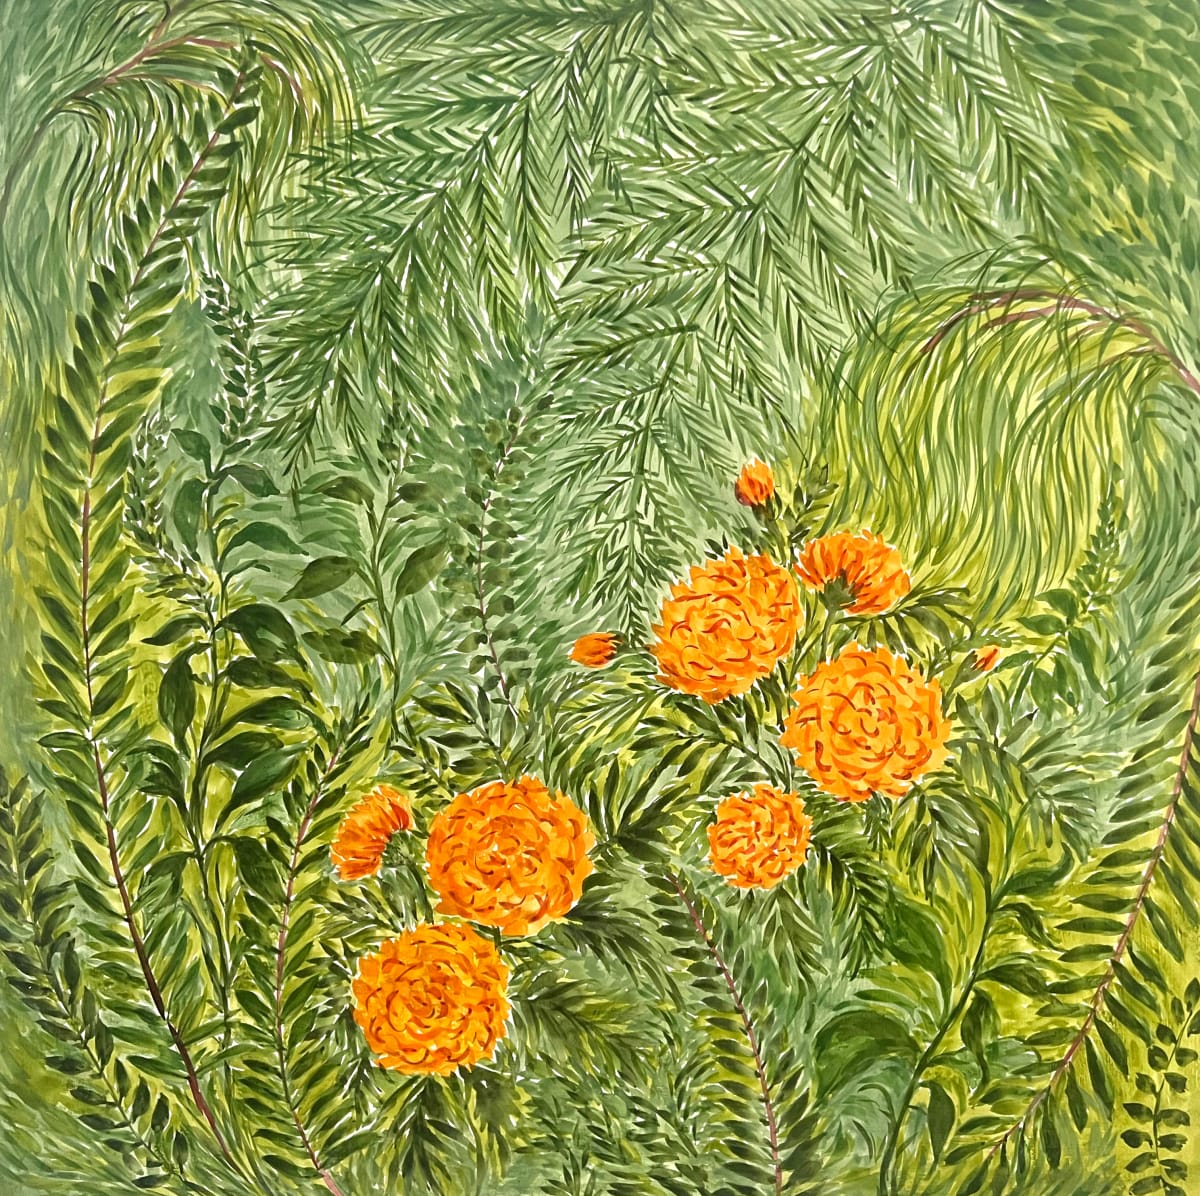 Marigold amongst the Ferns by Christopher Roch 